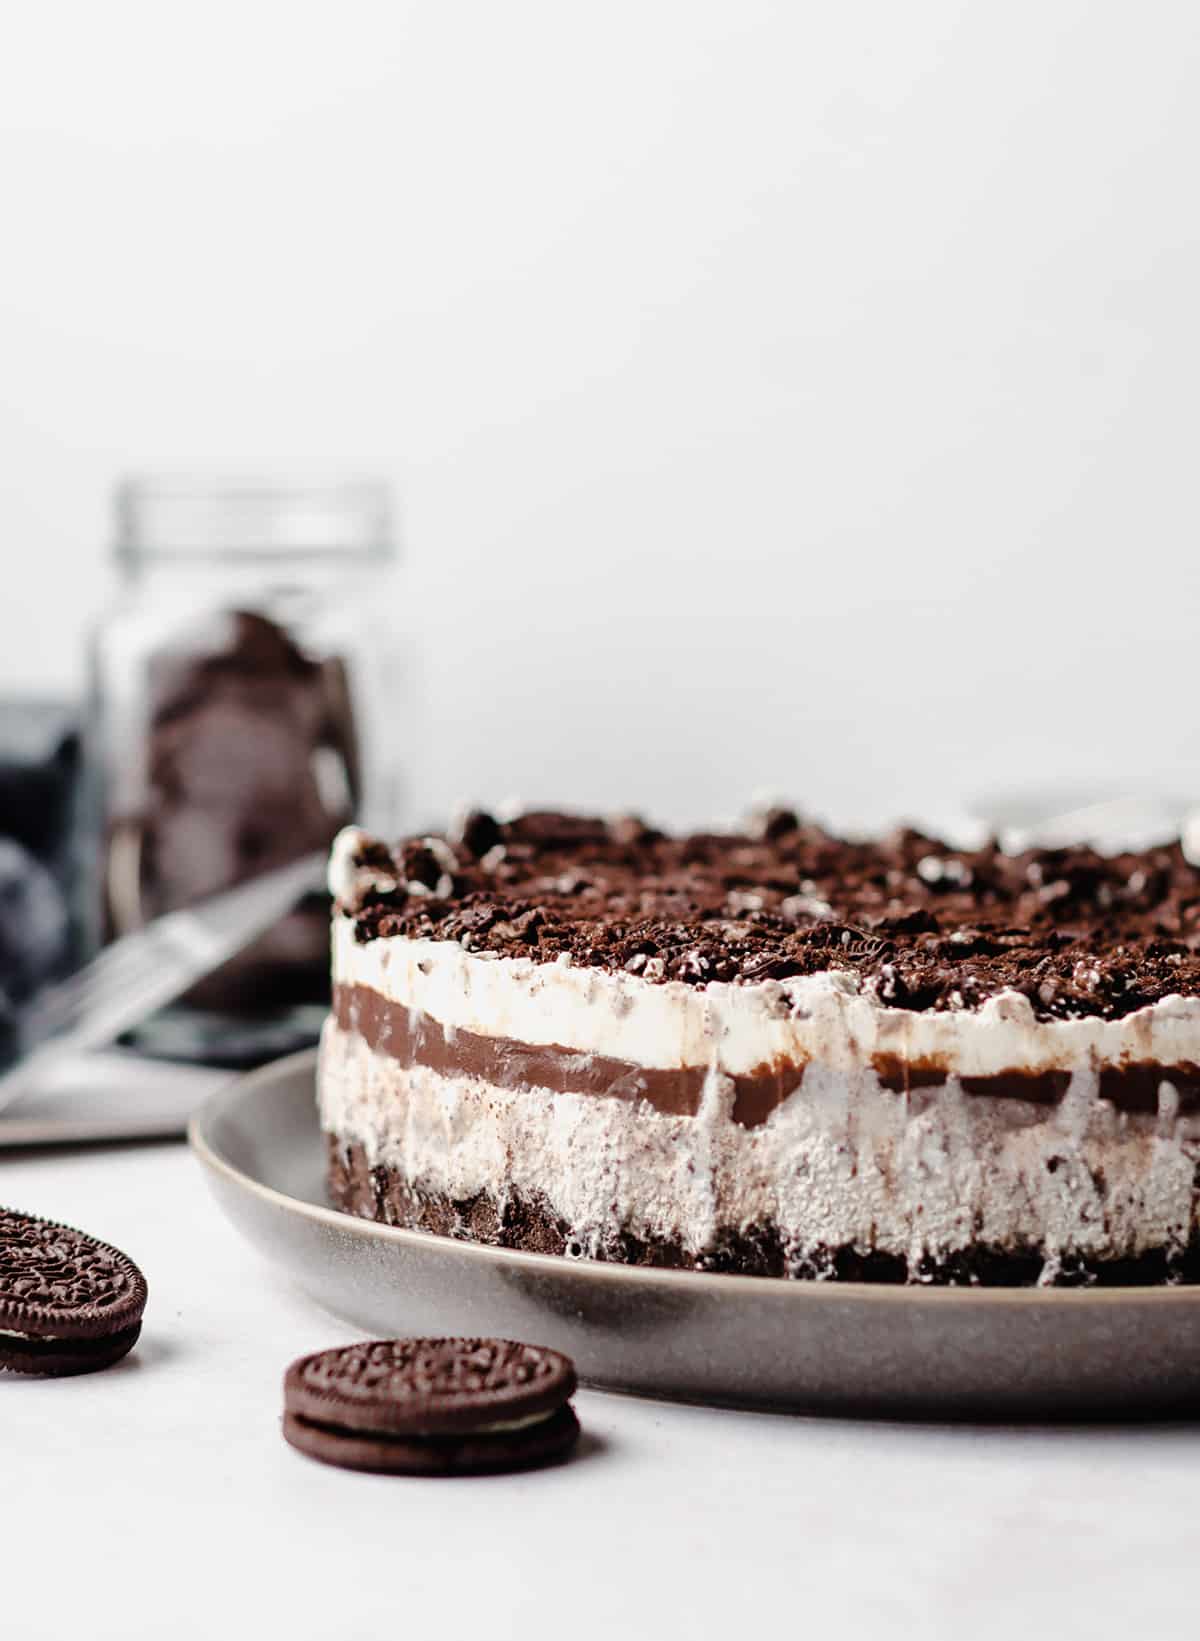 A front on view of a layered ice cream cake made with Oreo cookies.